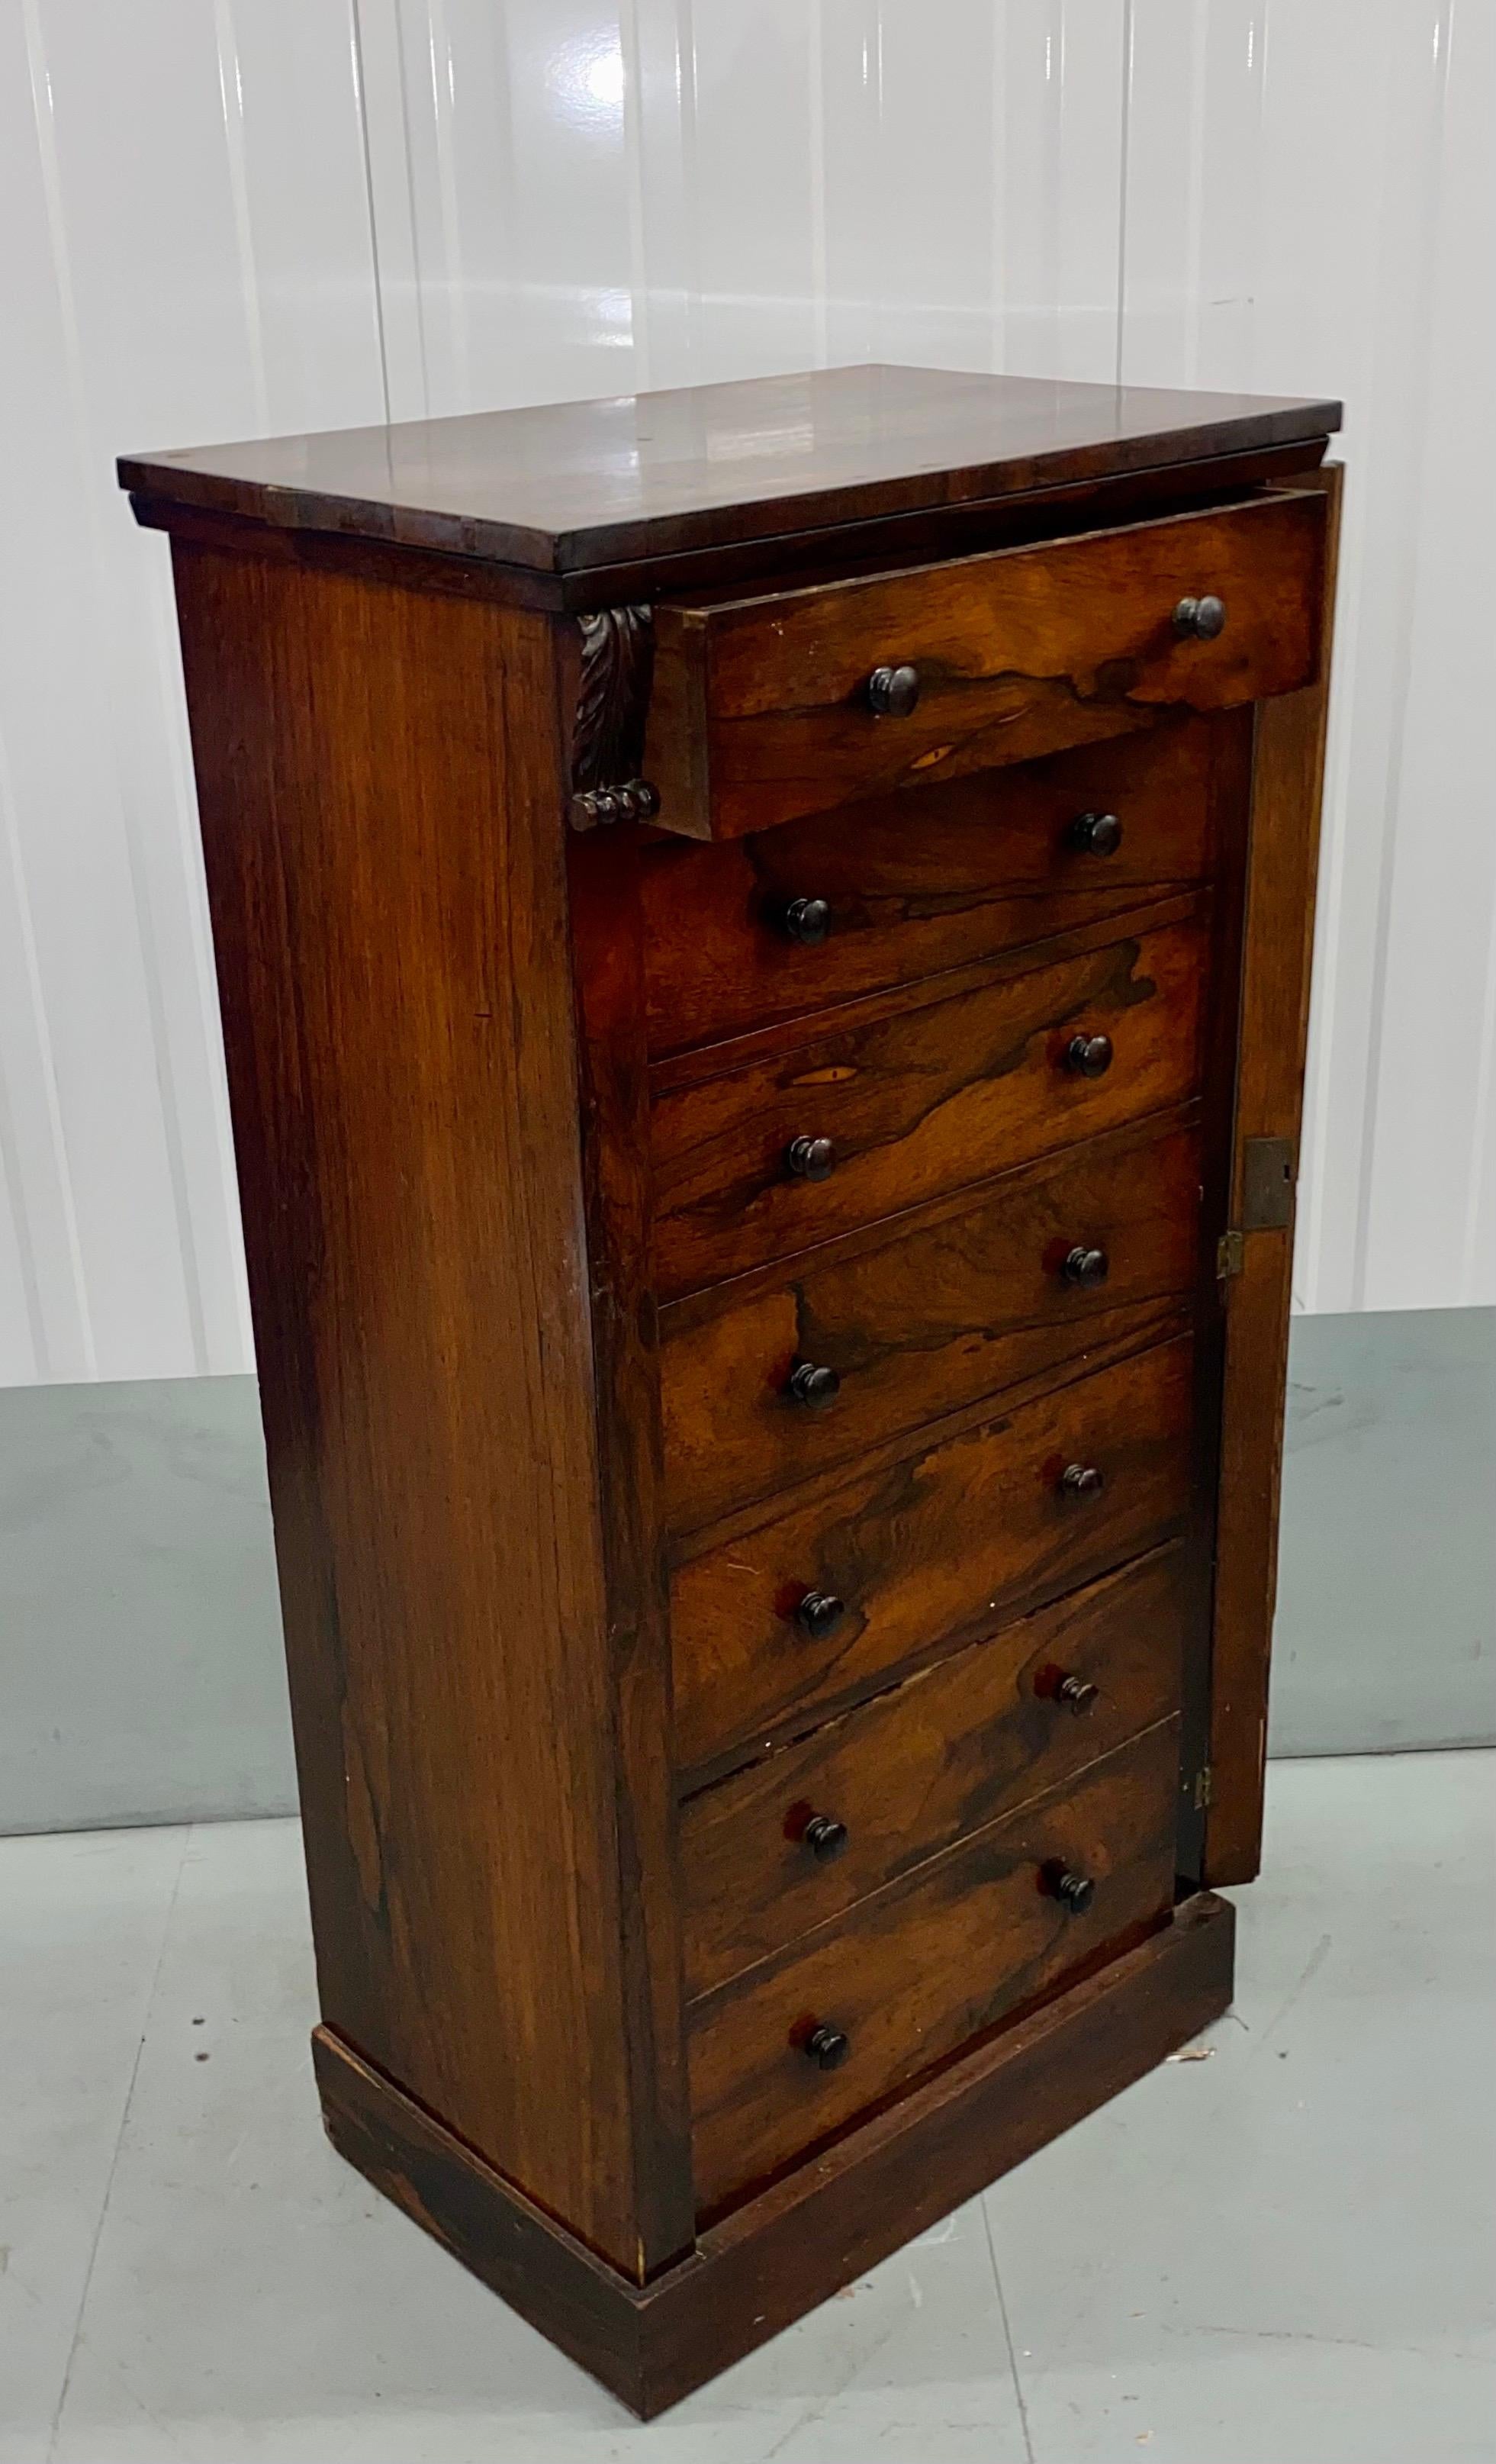 A nice antique rosewood wellington chest of drawers in good and original condition. Superb quality swirl detail o the Rosewood veneer; This is a very good example with the key that works perfectly.
Size: 54 cm x 36.5 cm x H 124 cm.